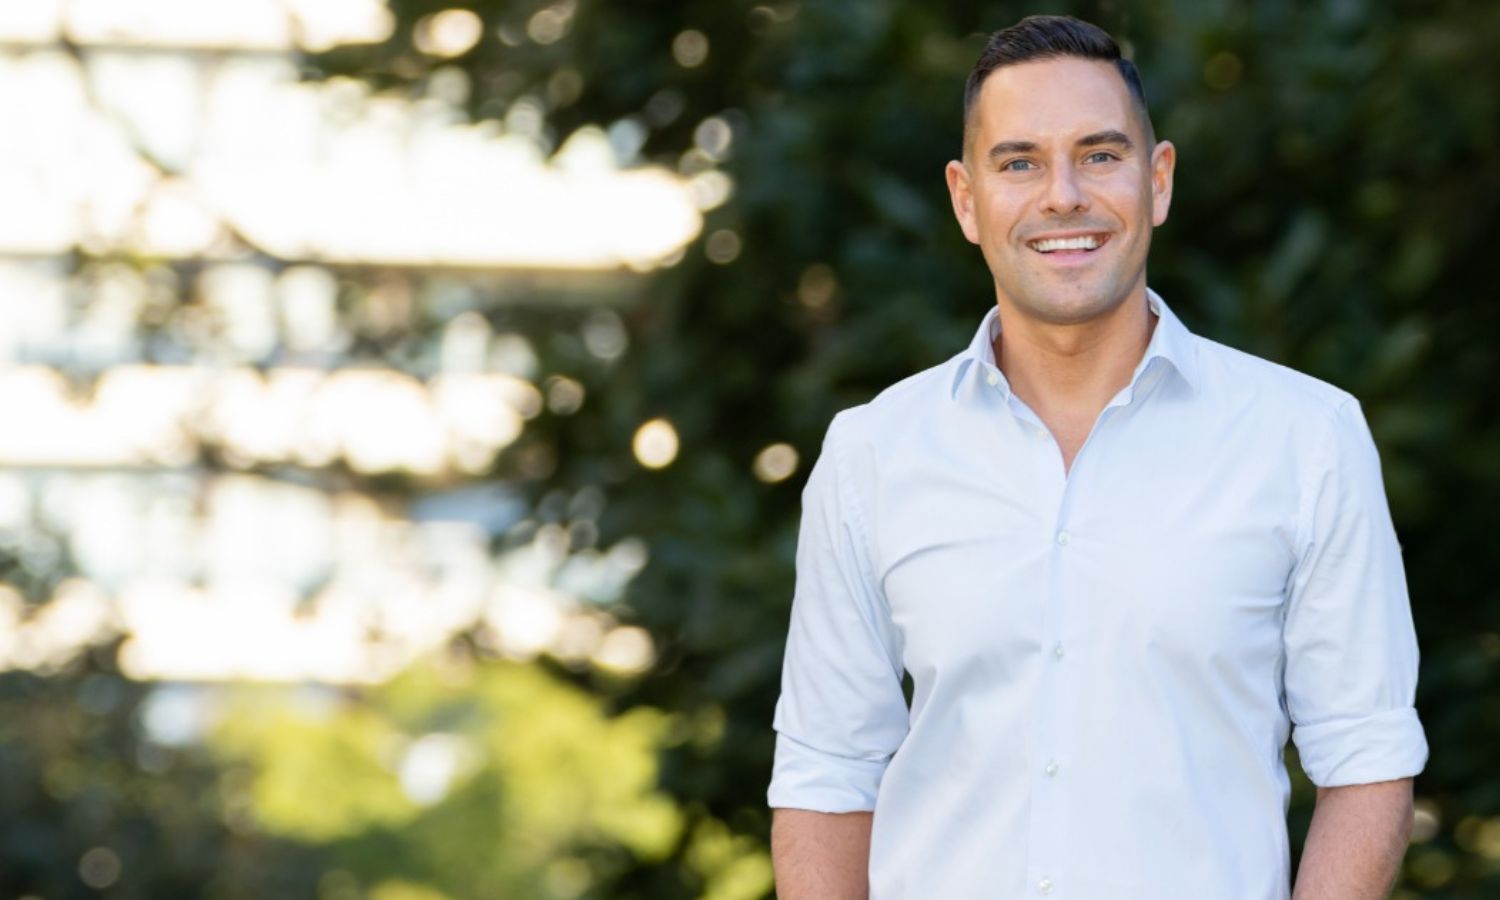 Independent MP Alex Greenwich who is campaigning to update the anti-homohobia laws in NSW